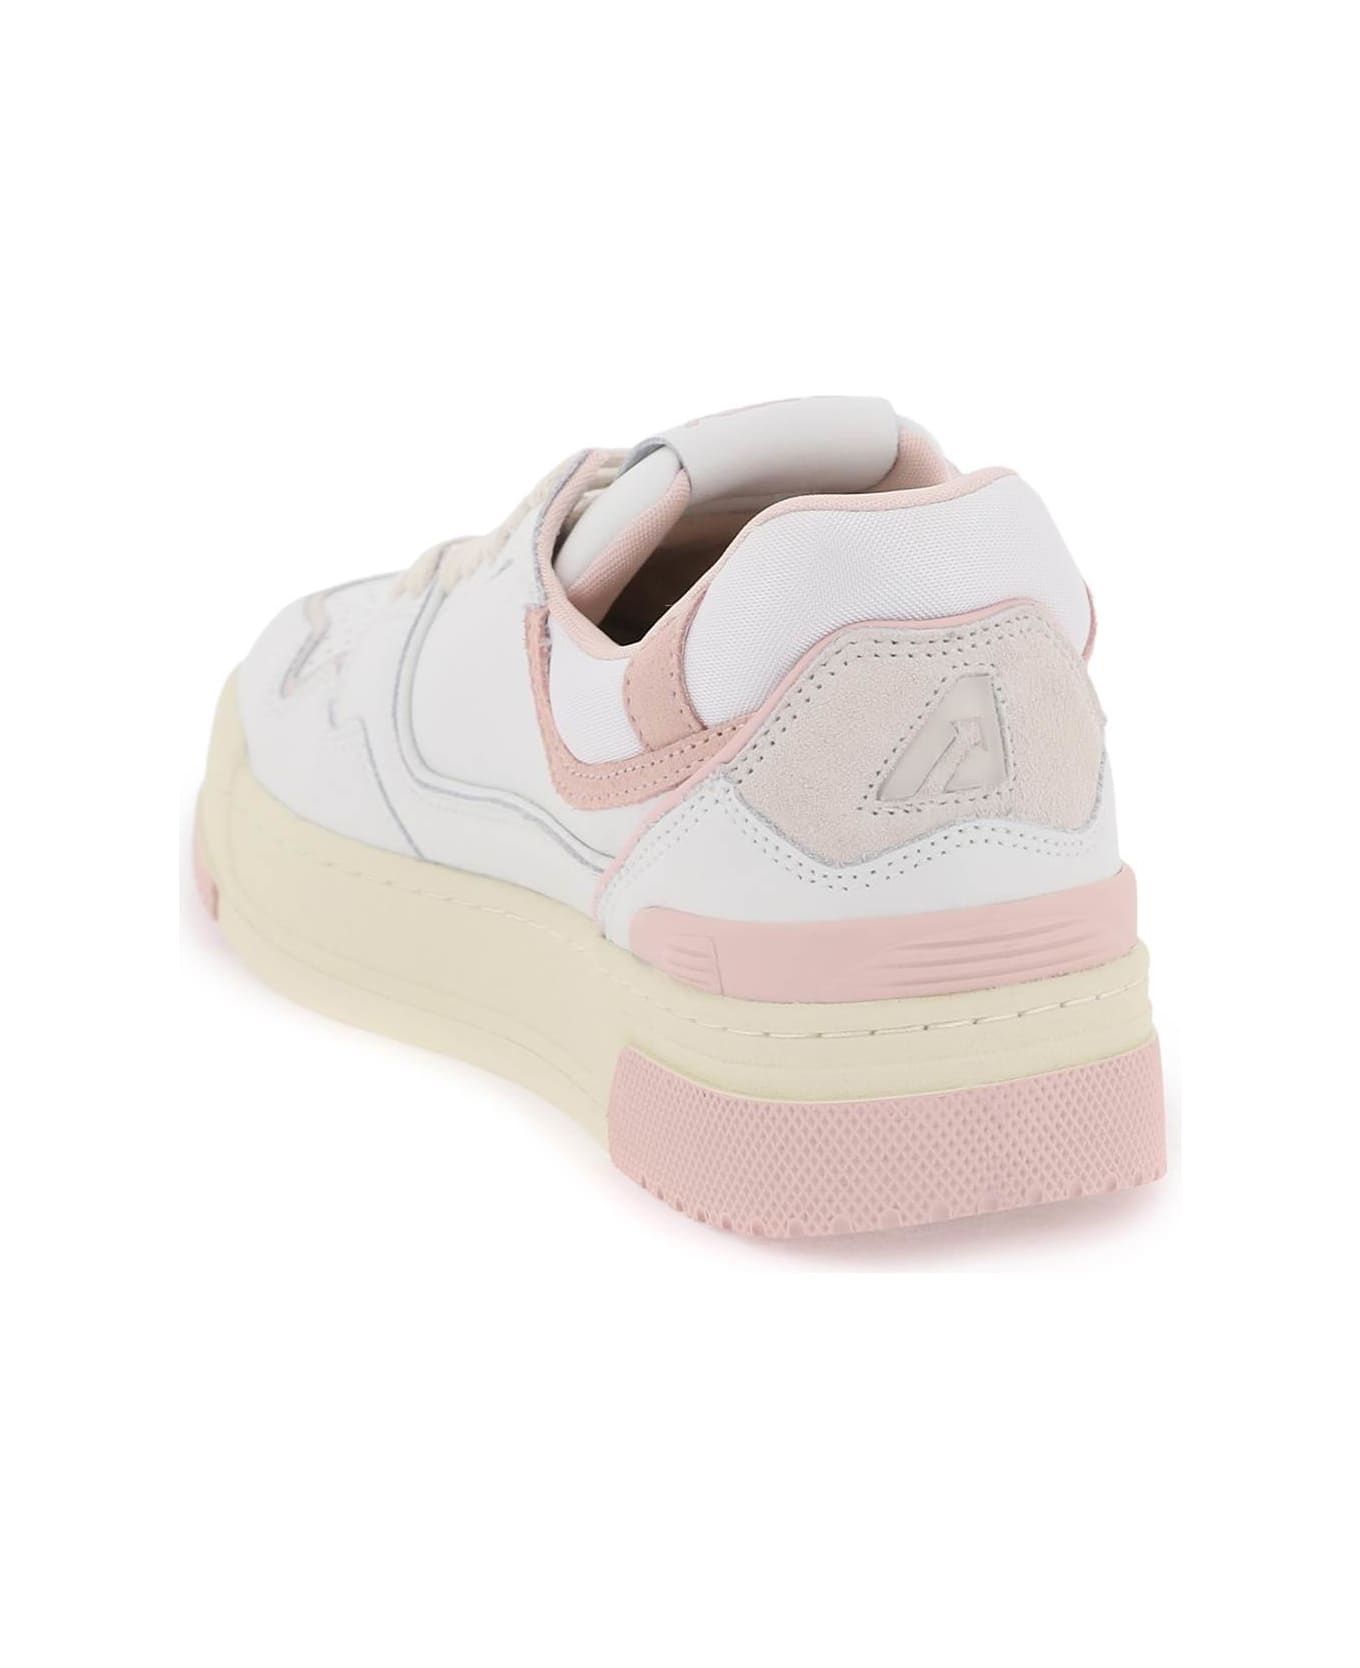 Autry Clc Sneakers In White And Pink Leather - White